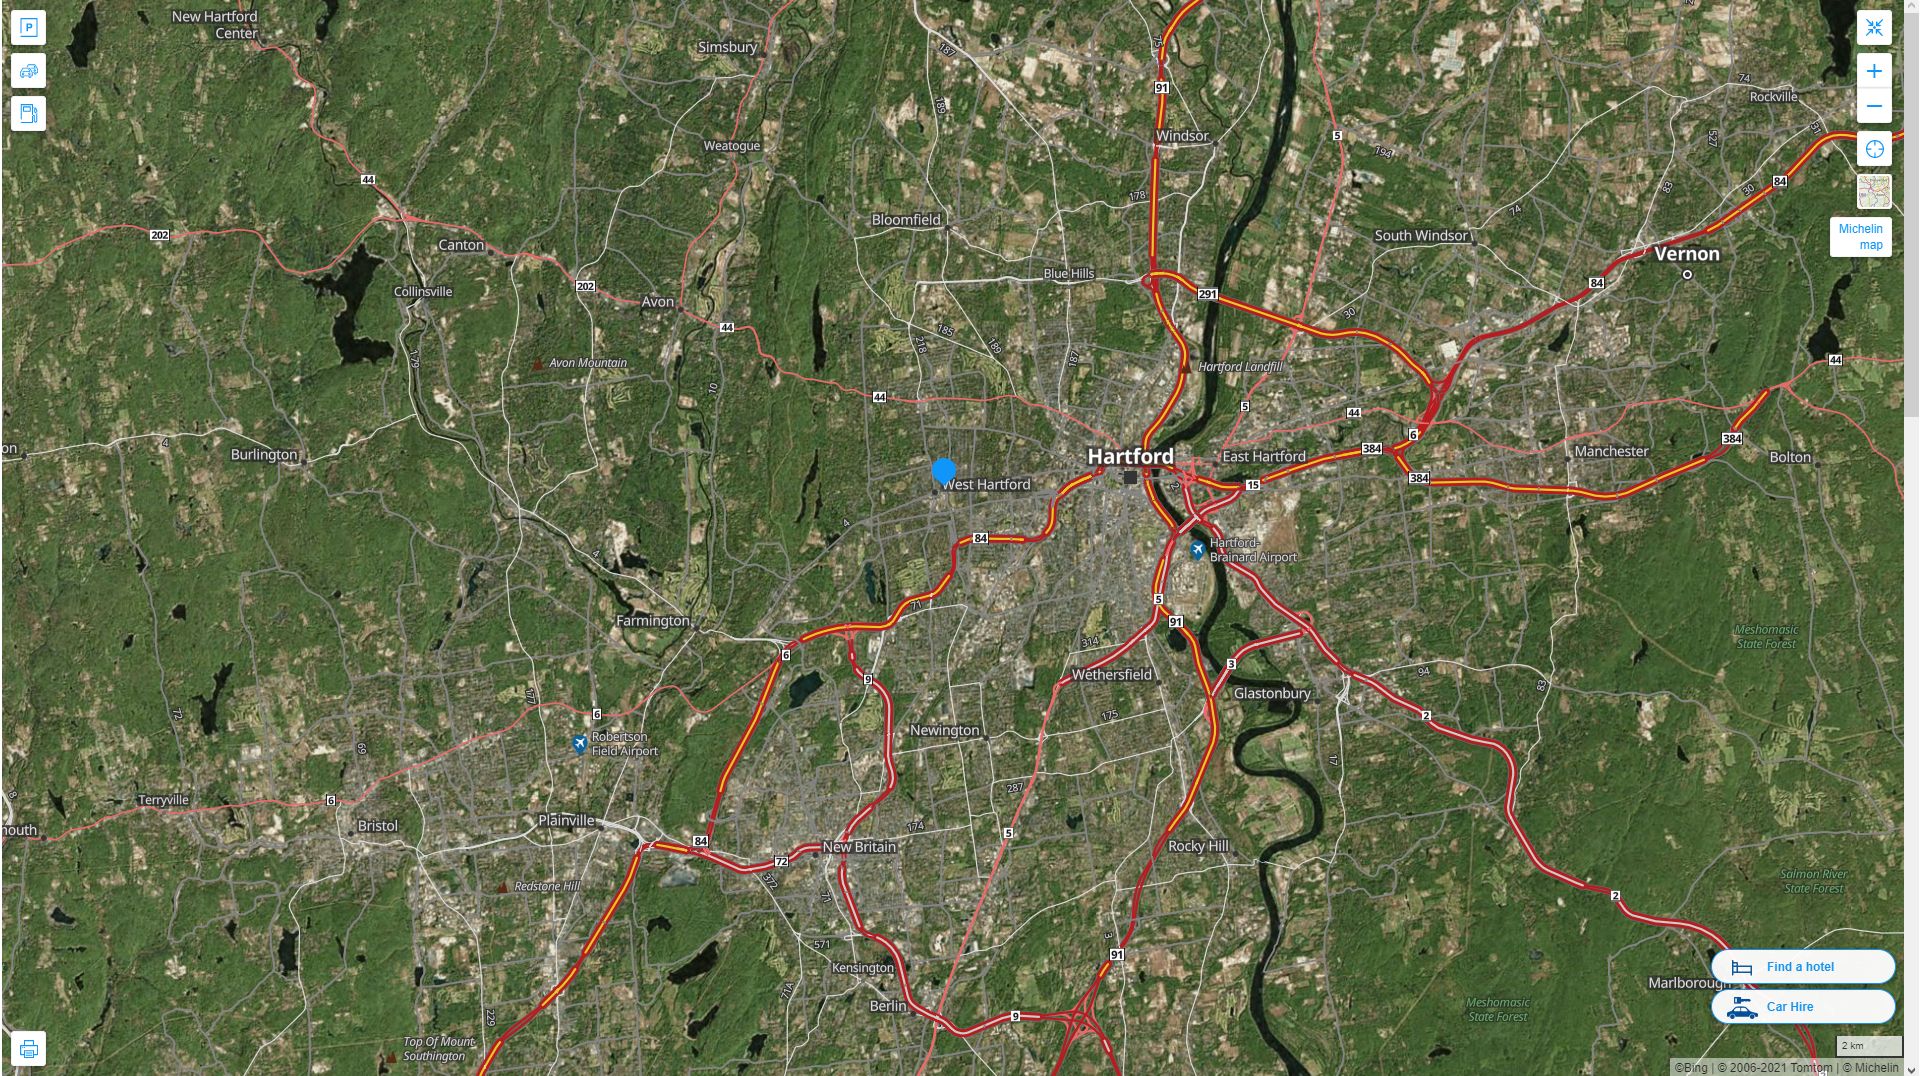 West Hartford Connecticut Highway and Road Map with Satellite View